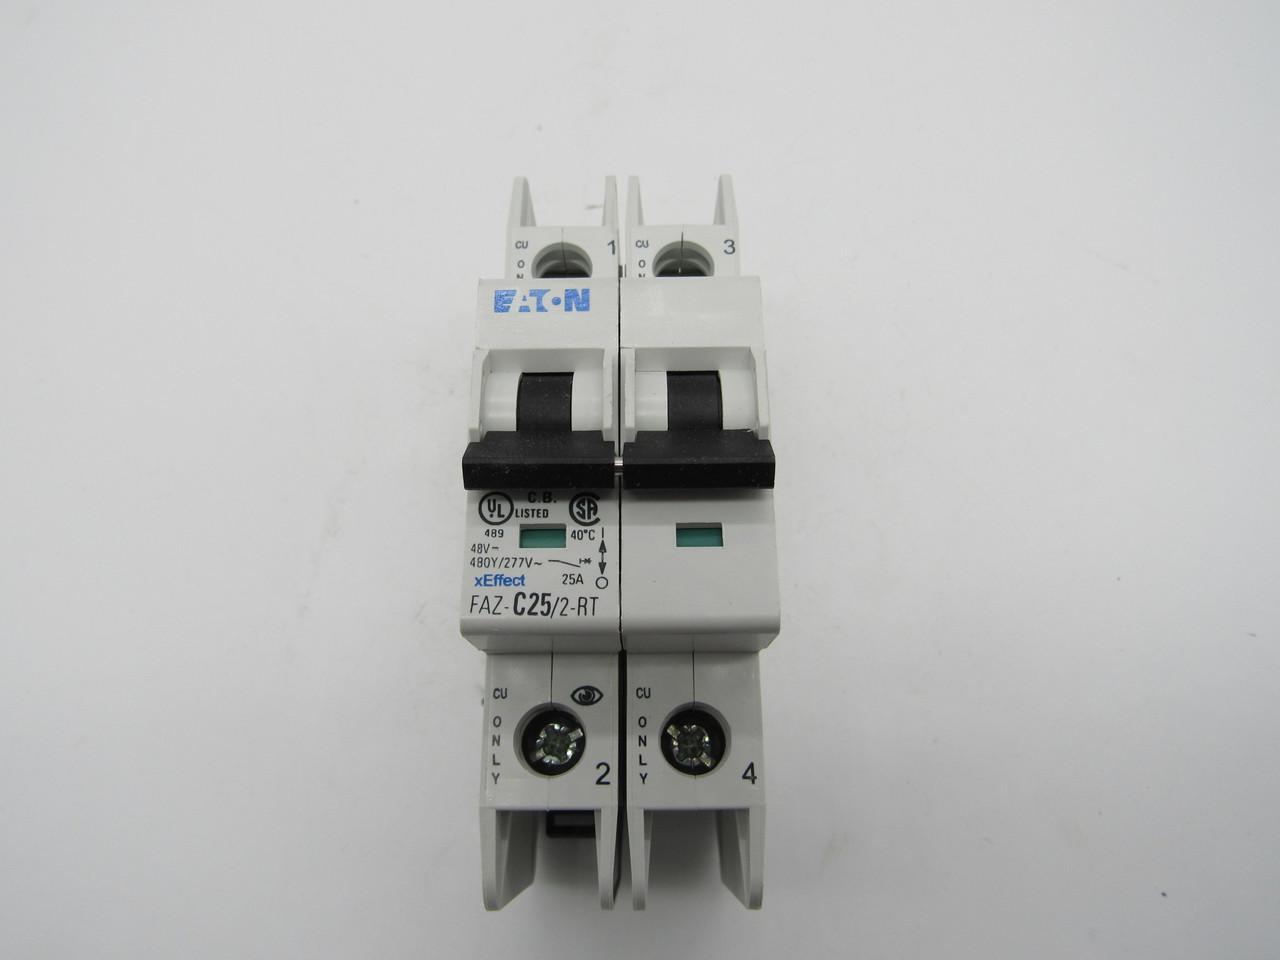 Eaton FAZ-C25/2-RT 277/480 VAC 50/60 Hz, 25 A, 2-Pole, 10/14 kA, 5 to 10 x Rated Current, Ring Tongue Terminal, DIN Rail Mount, Standard Packaging, C-Curve, Current Limiting, Thermal Magnetic